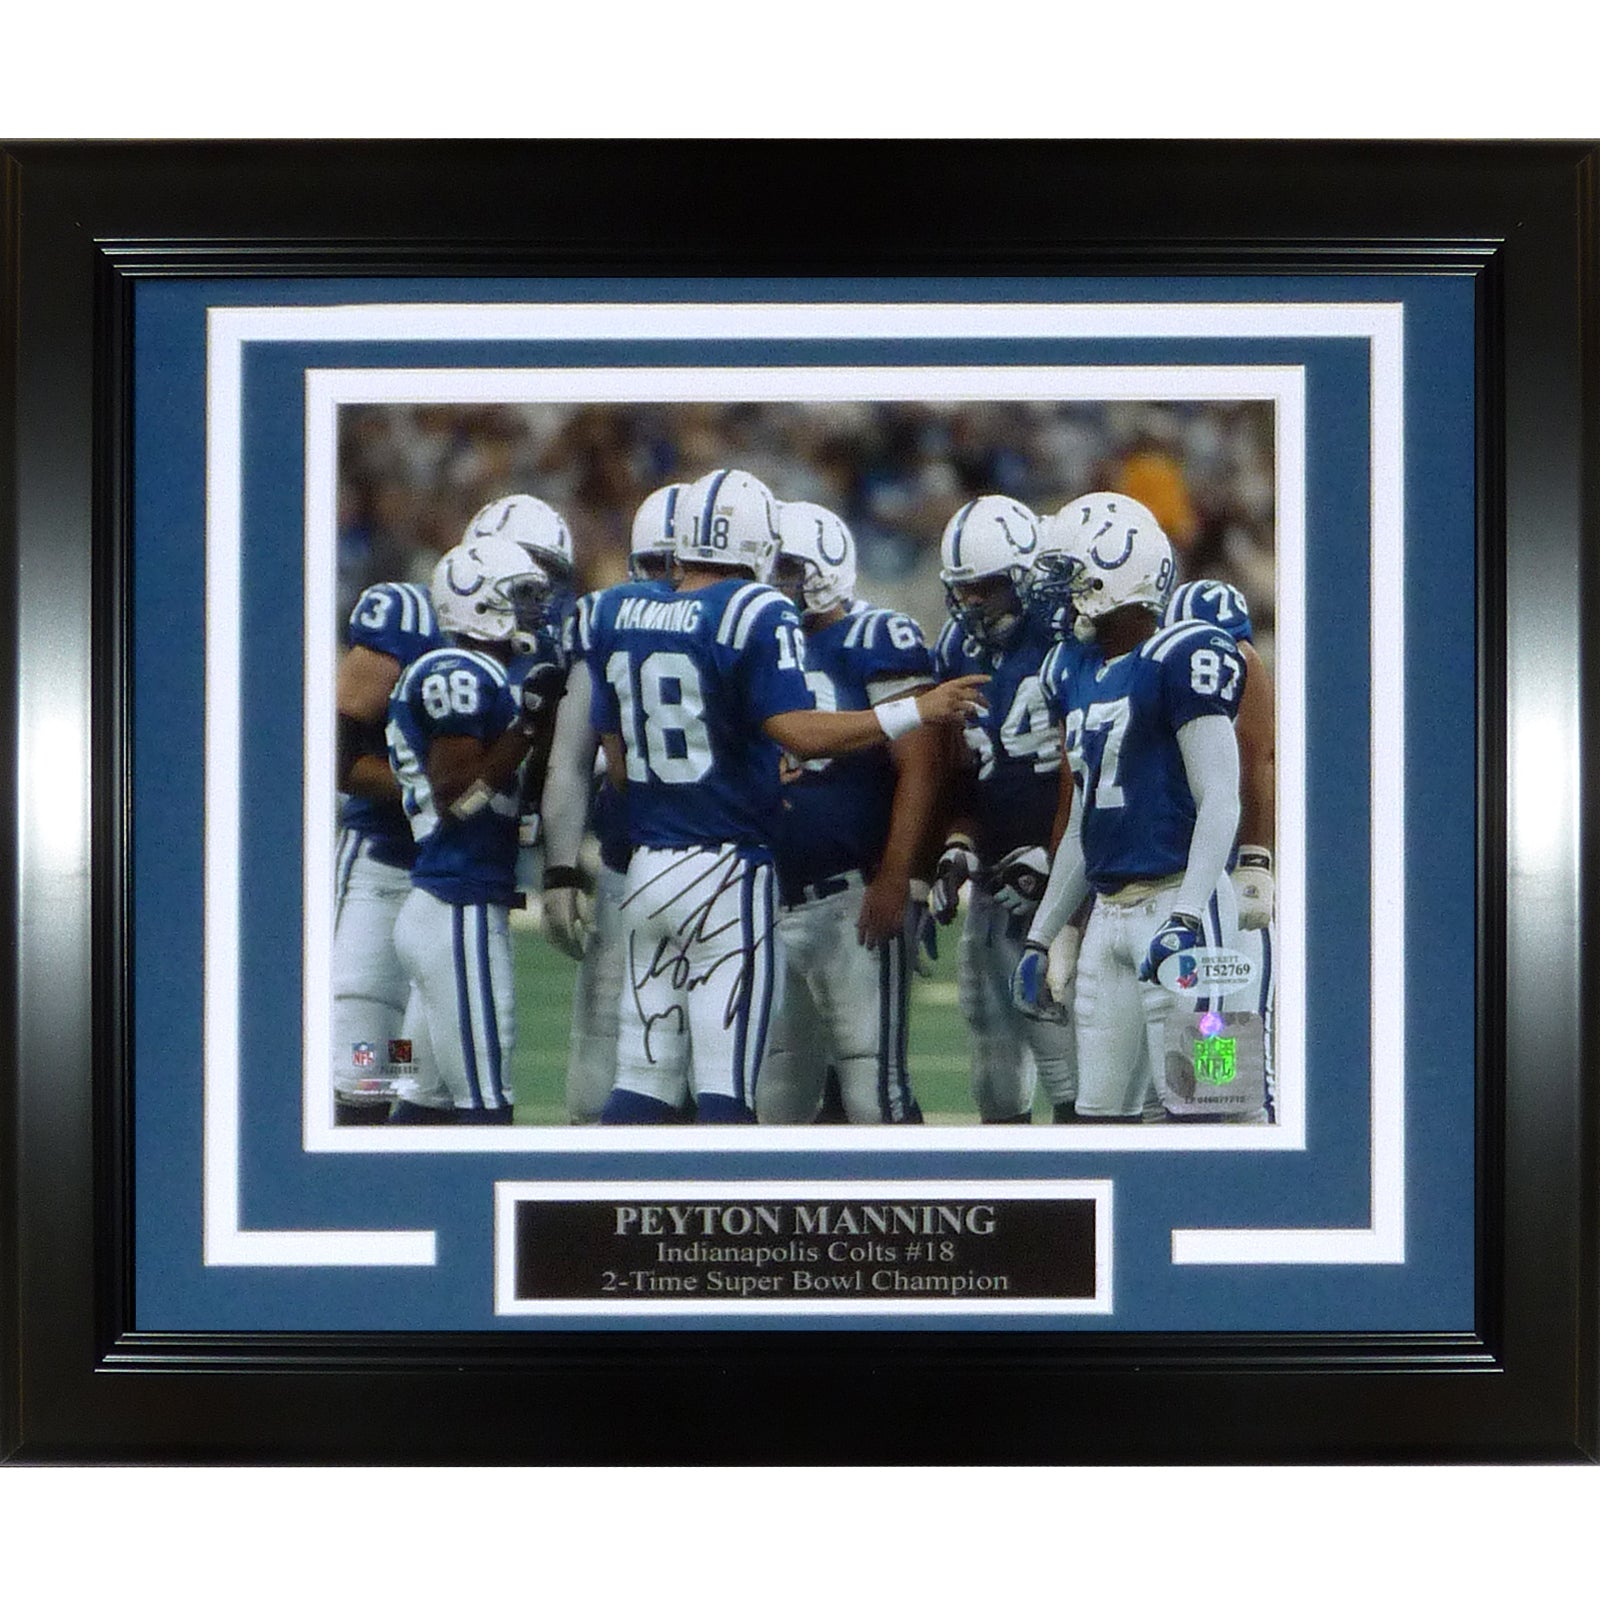 Peyton Manning Autographed Indianapolis Colts Deluxe Framed 8x10 Photo Beckett